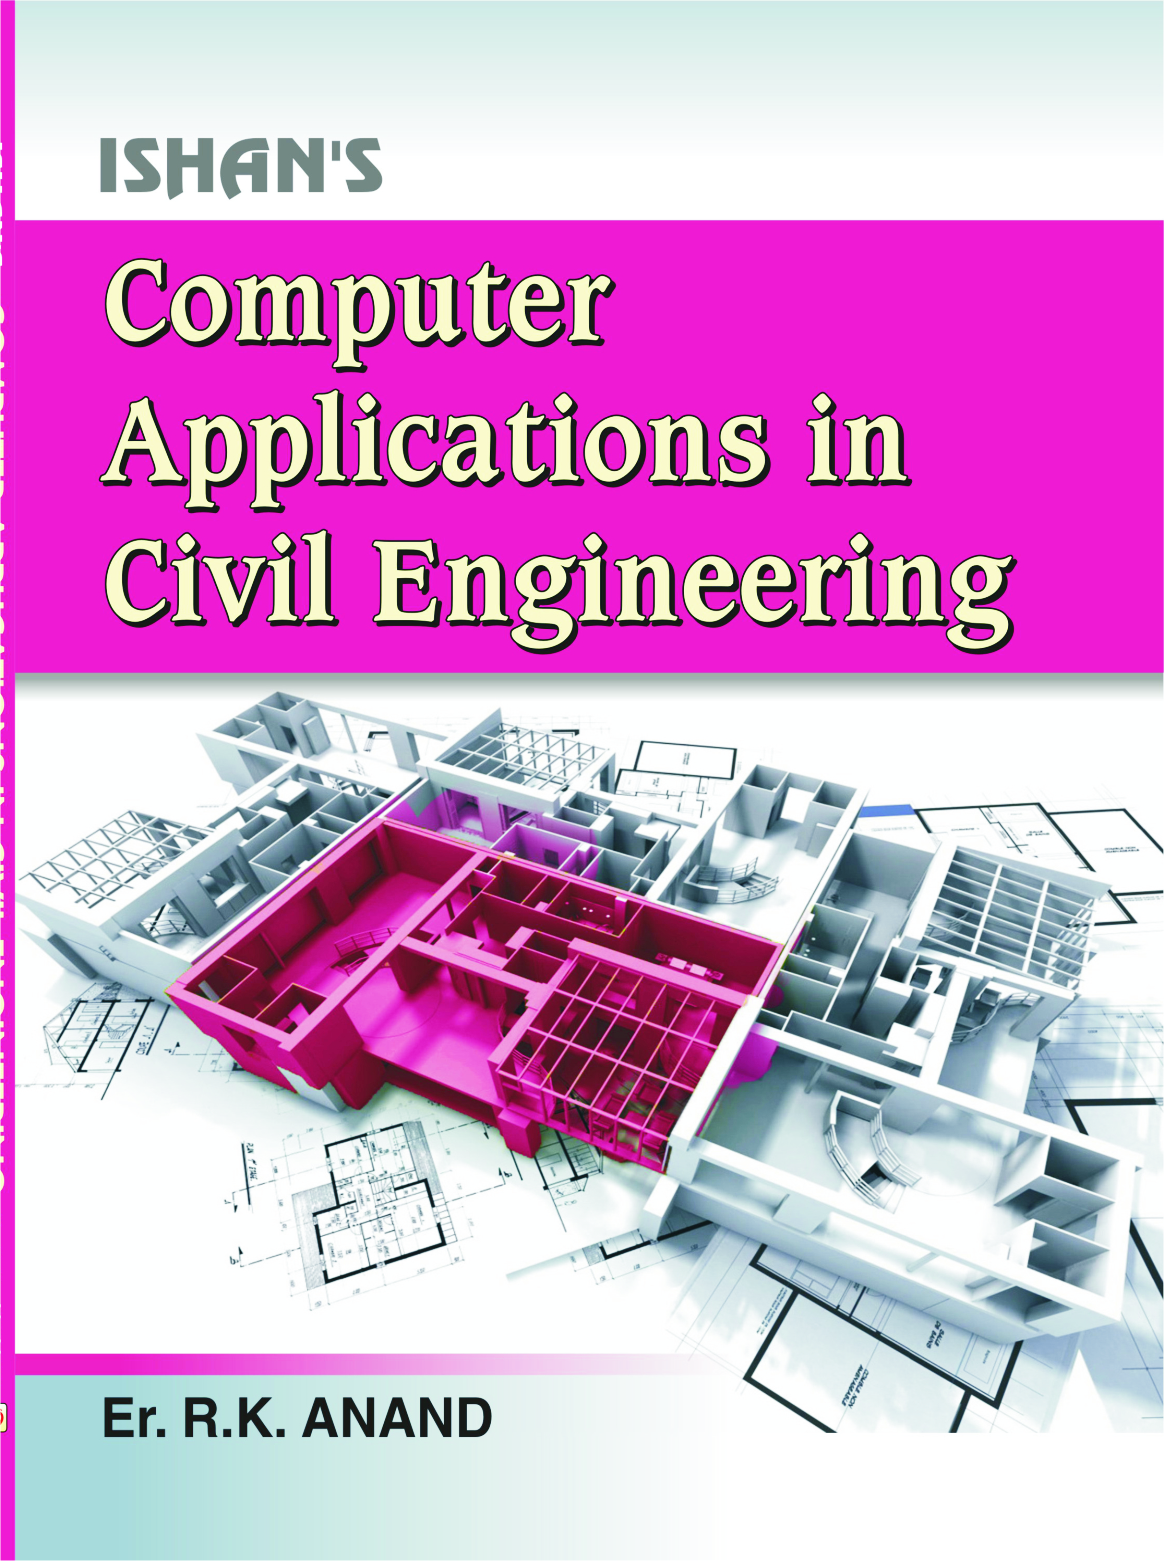 Computer Application in Civil Engineering